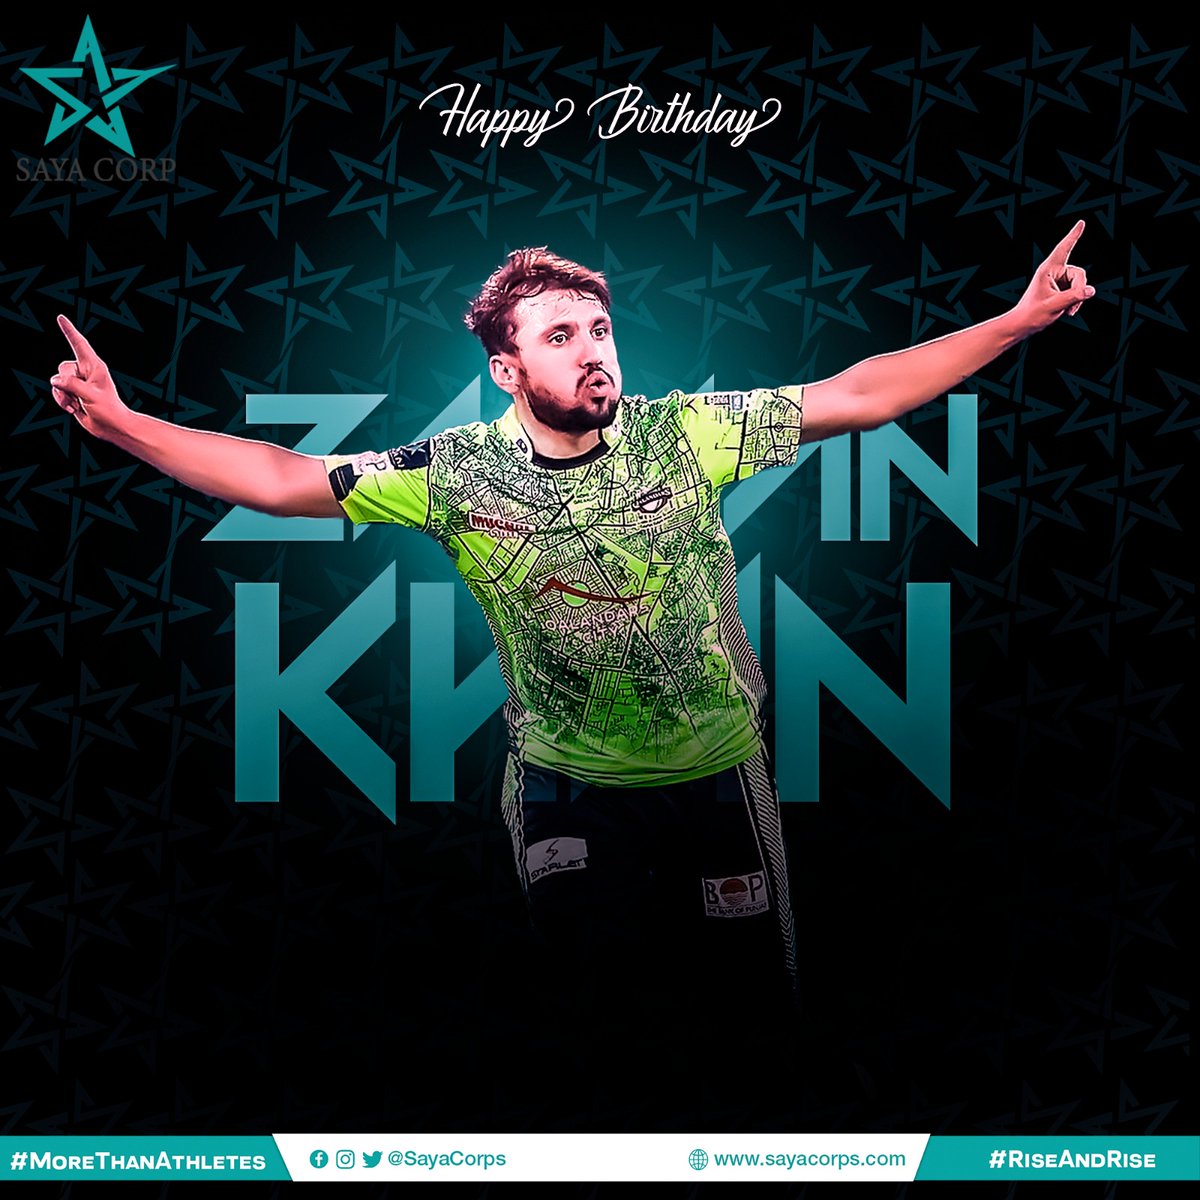 The #SayaCorporation star-pacer @ZamanKhanPak from the Valleys of Kashmir turns 2️⃣2️⃣ today 🎉 The two-time PSL champion has represented 🇵🇰 all across the globe in different overseas T20 Leagues 🙌🏻 We wish him more #RiseAndRise in the upcoming challenges ✌🏻 #MoreThanAthletes